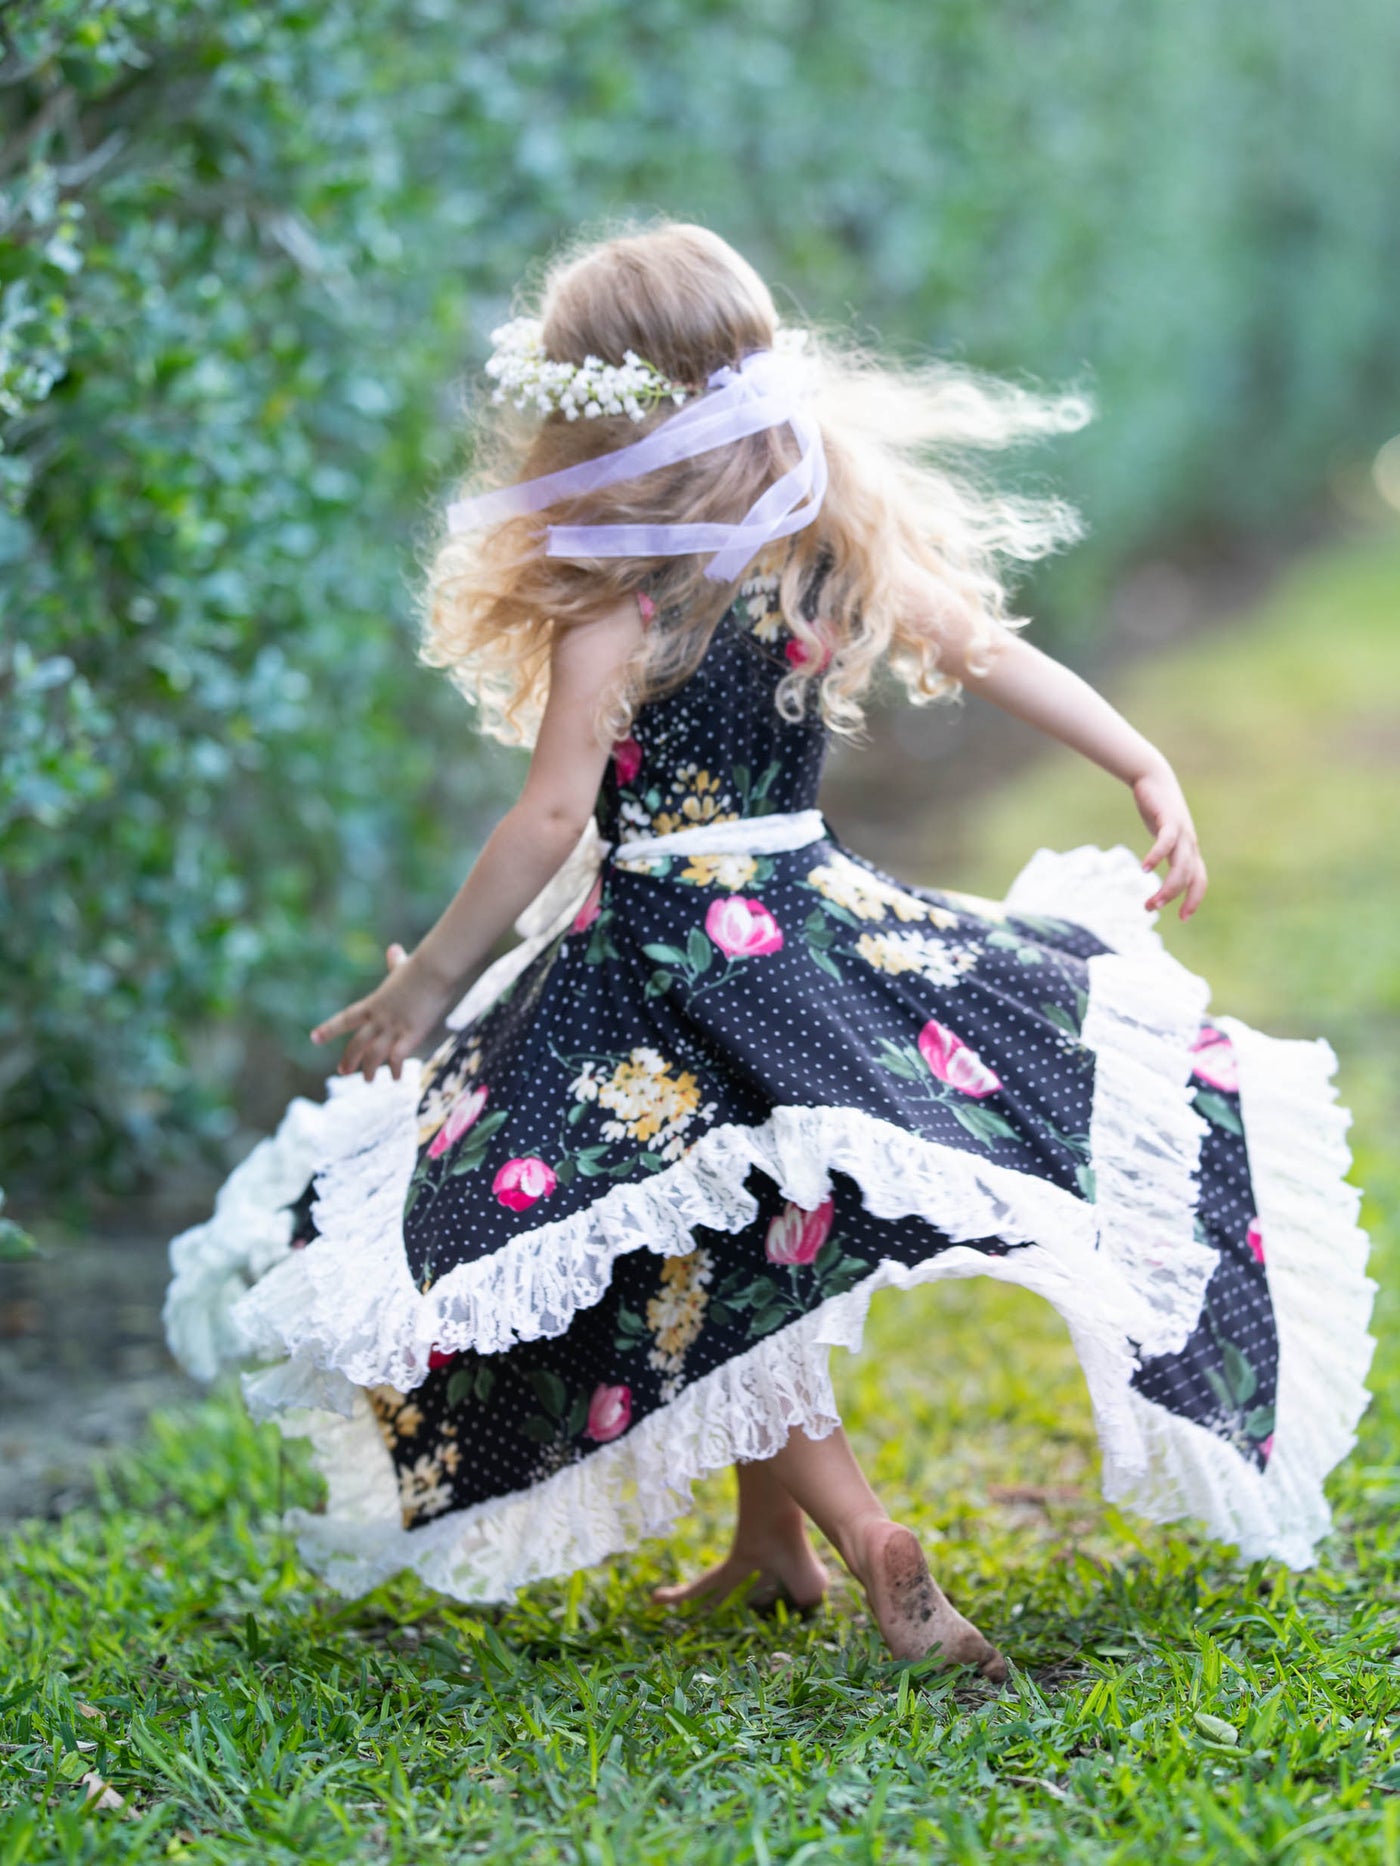 Girls Sleeveless Handkerchief Double Layer Ruffled Hem Dress with Flower Sash 2T-3T to 10Y/12Y black floral